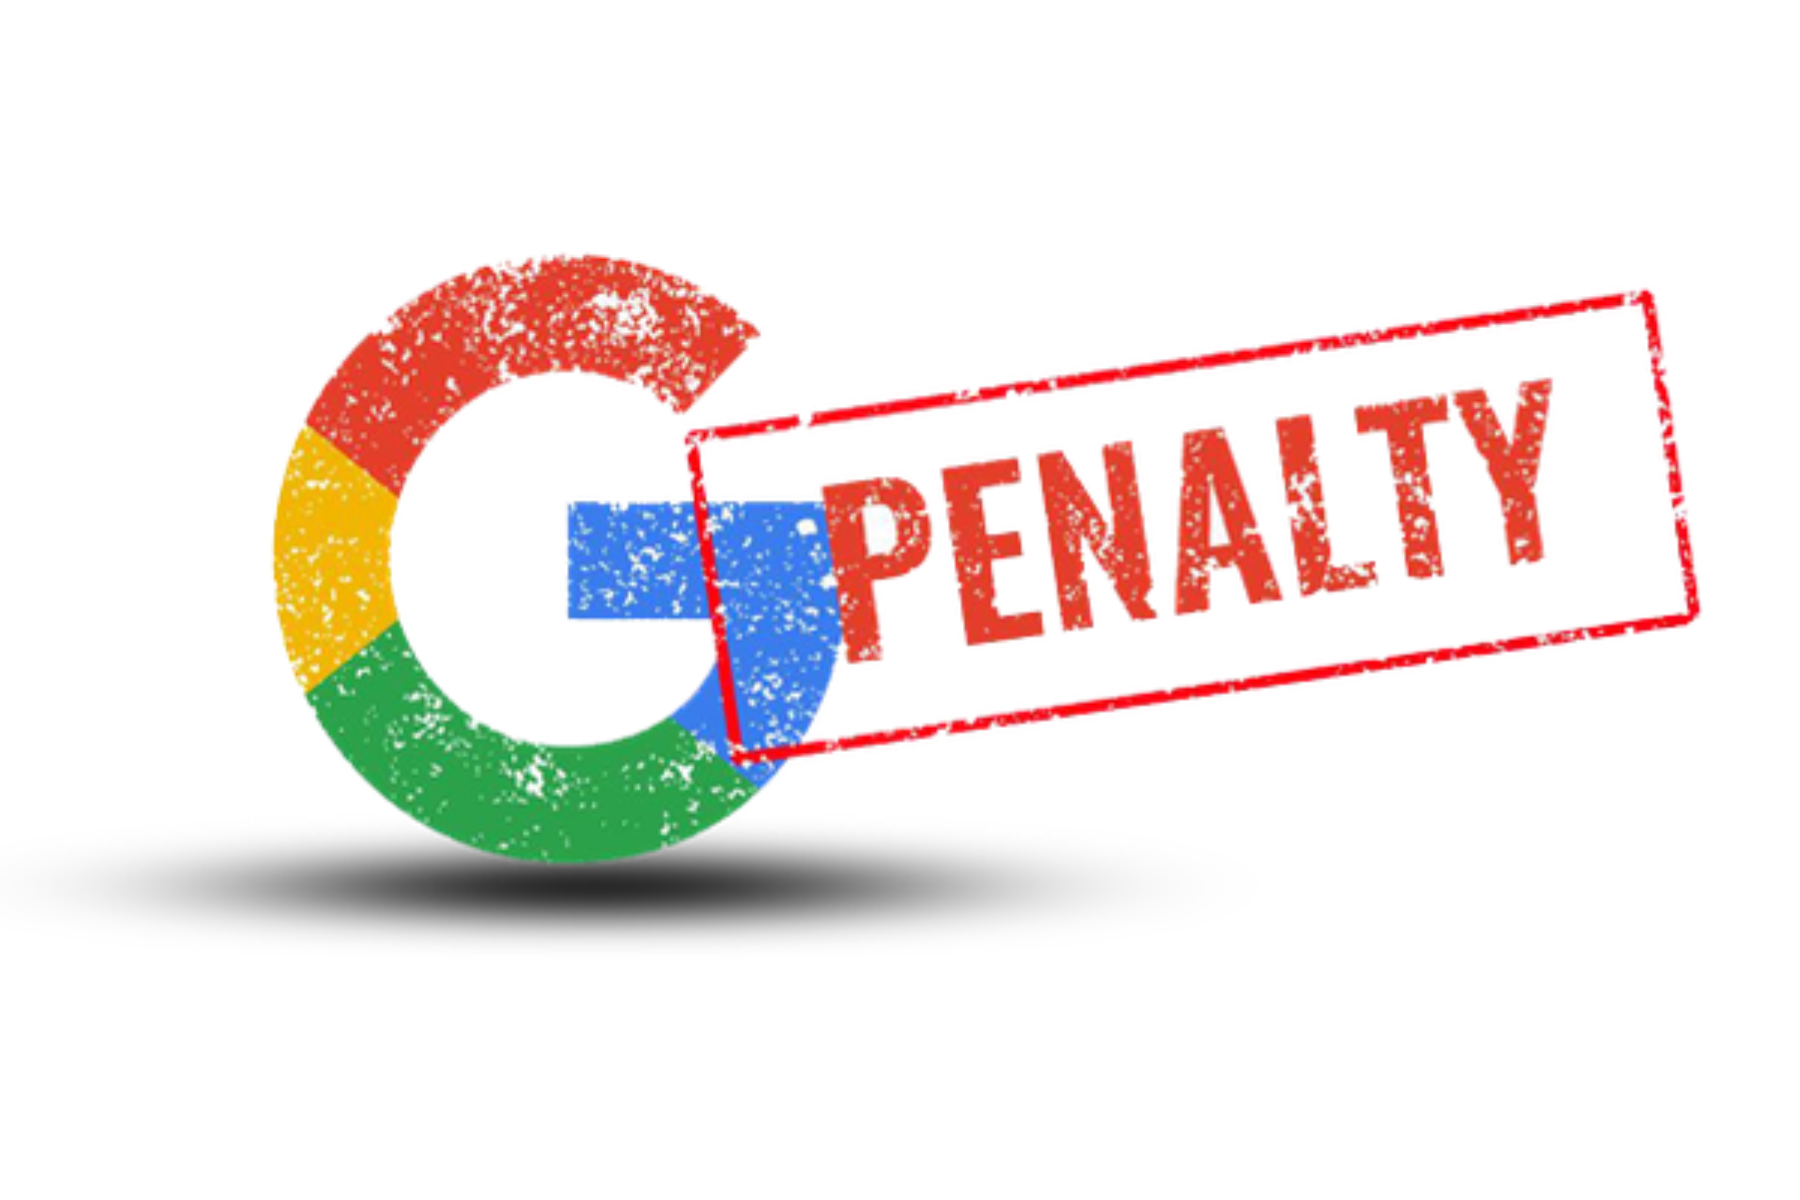 Google's logo with a Penalty sign